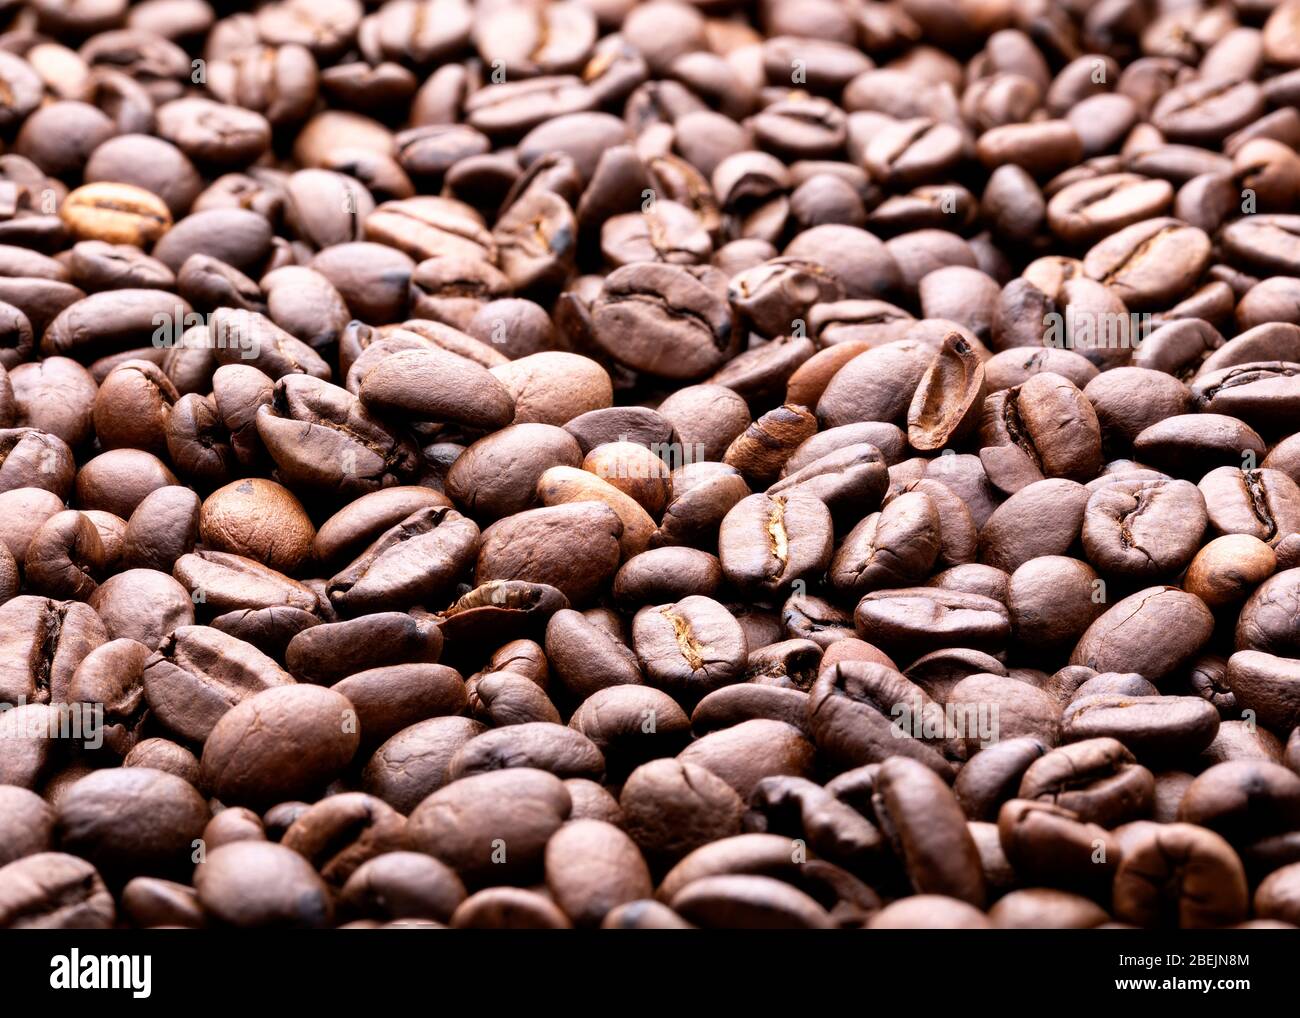 Roasted coffee beans background. Close-up. Selective focus Stock Photo